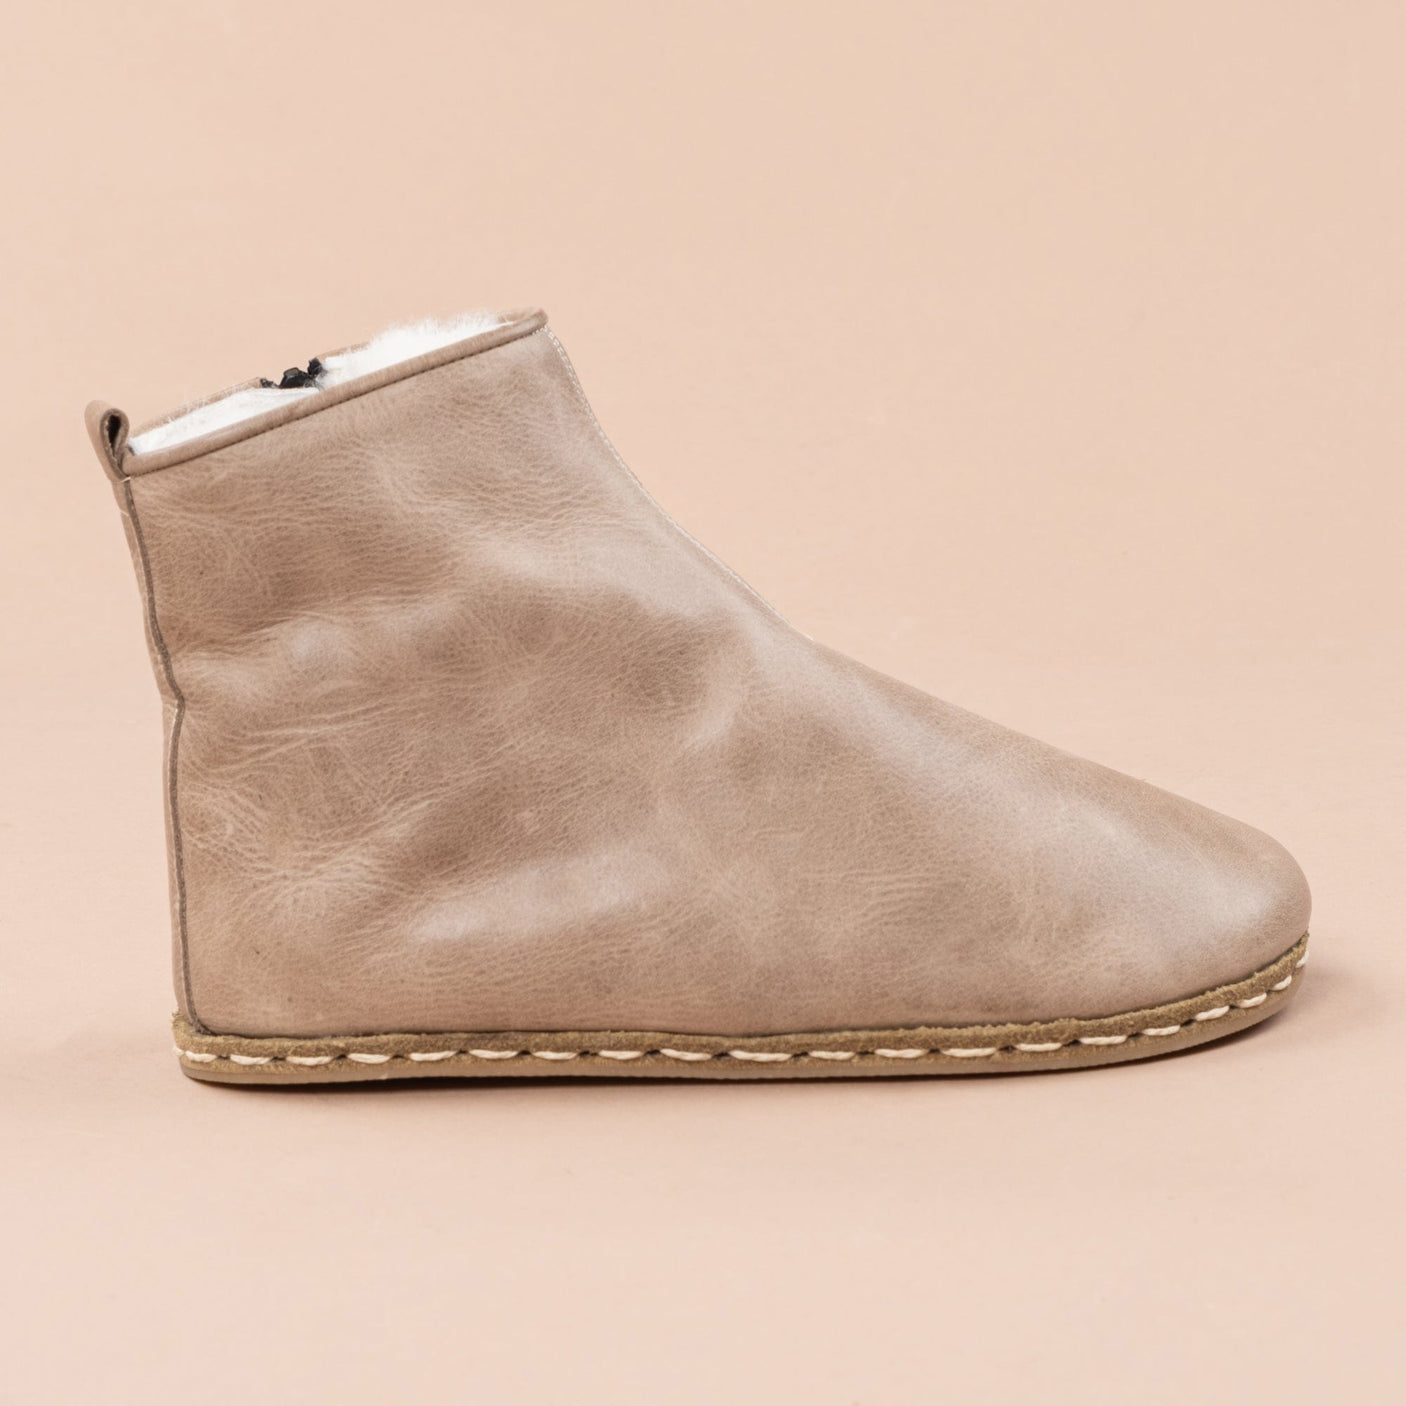 Women's Tan Barefoot Boots with Fur